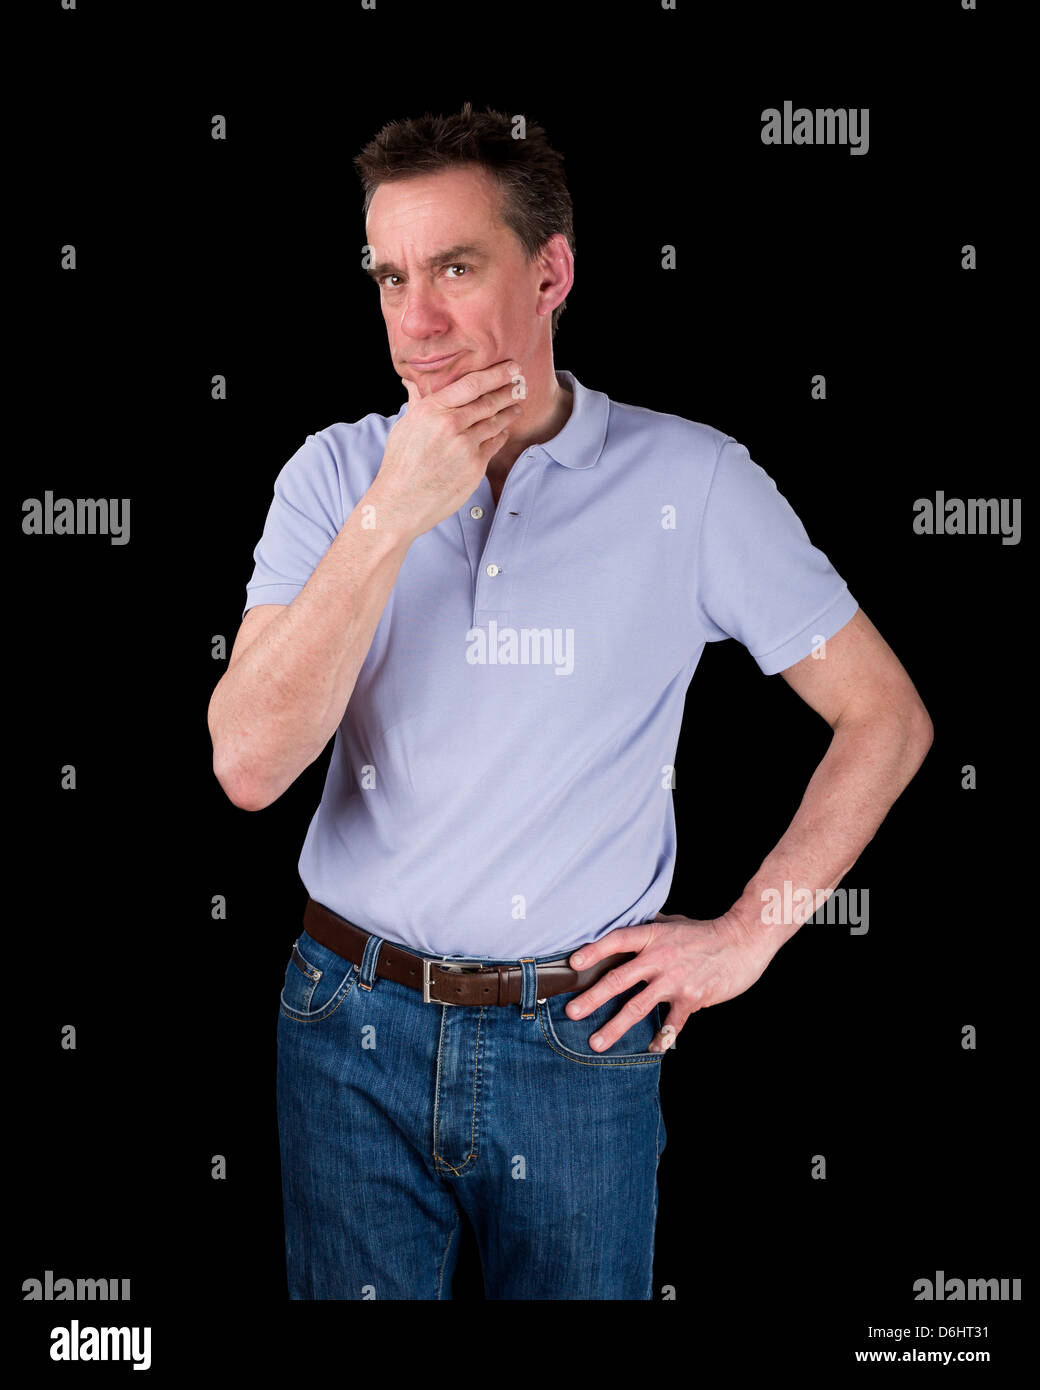 Thoughtful Middle Age Man Considering Something Hand on Hip Black Background Stock Photo